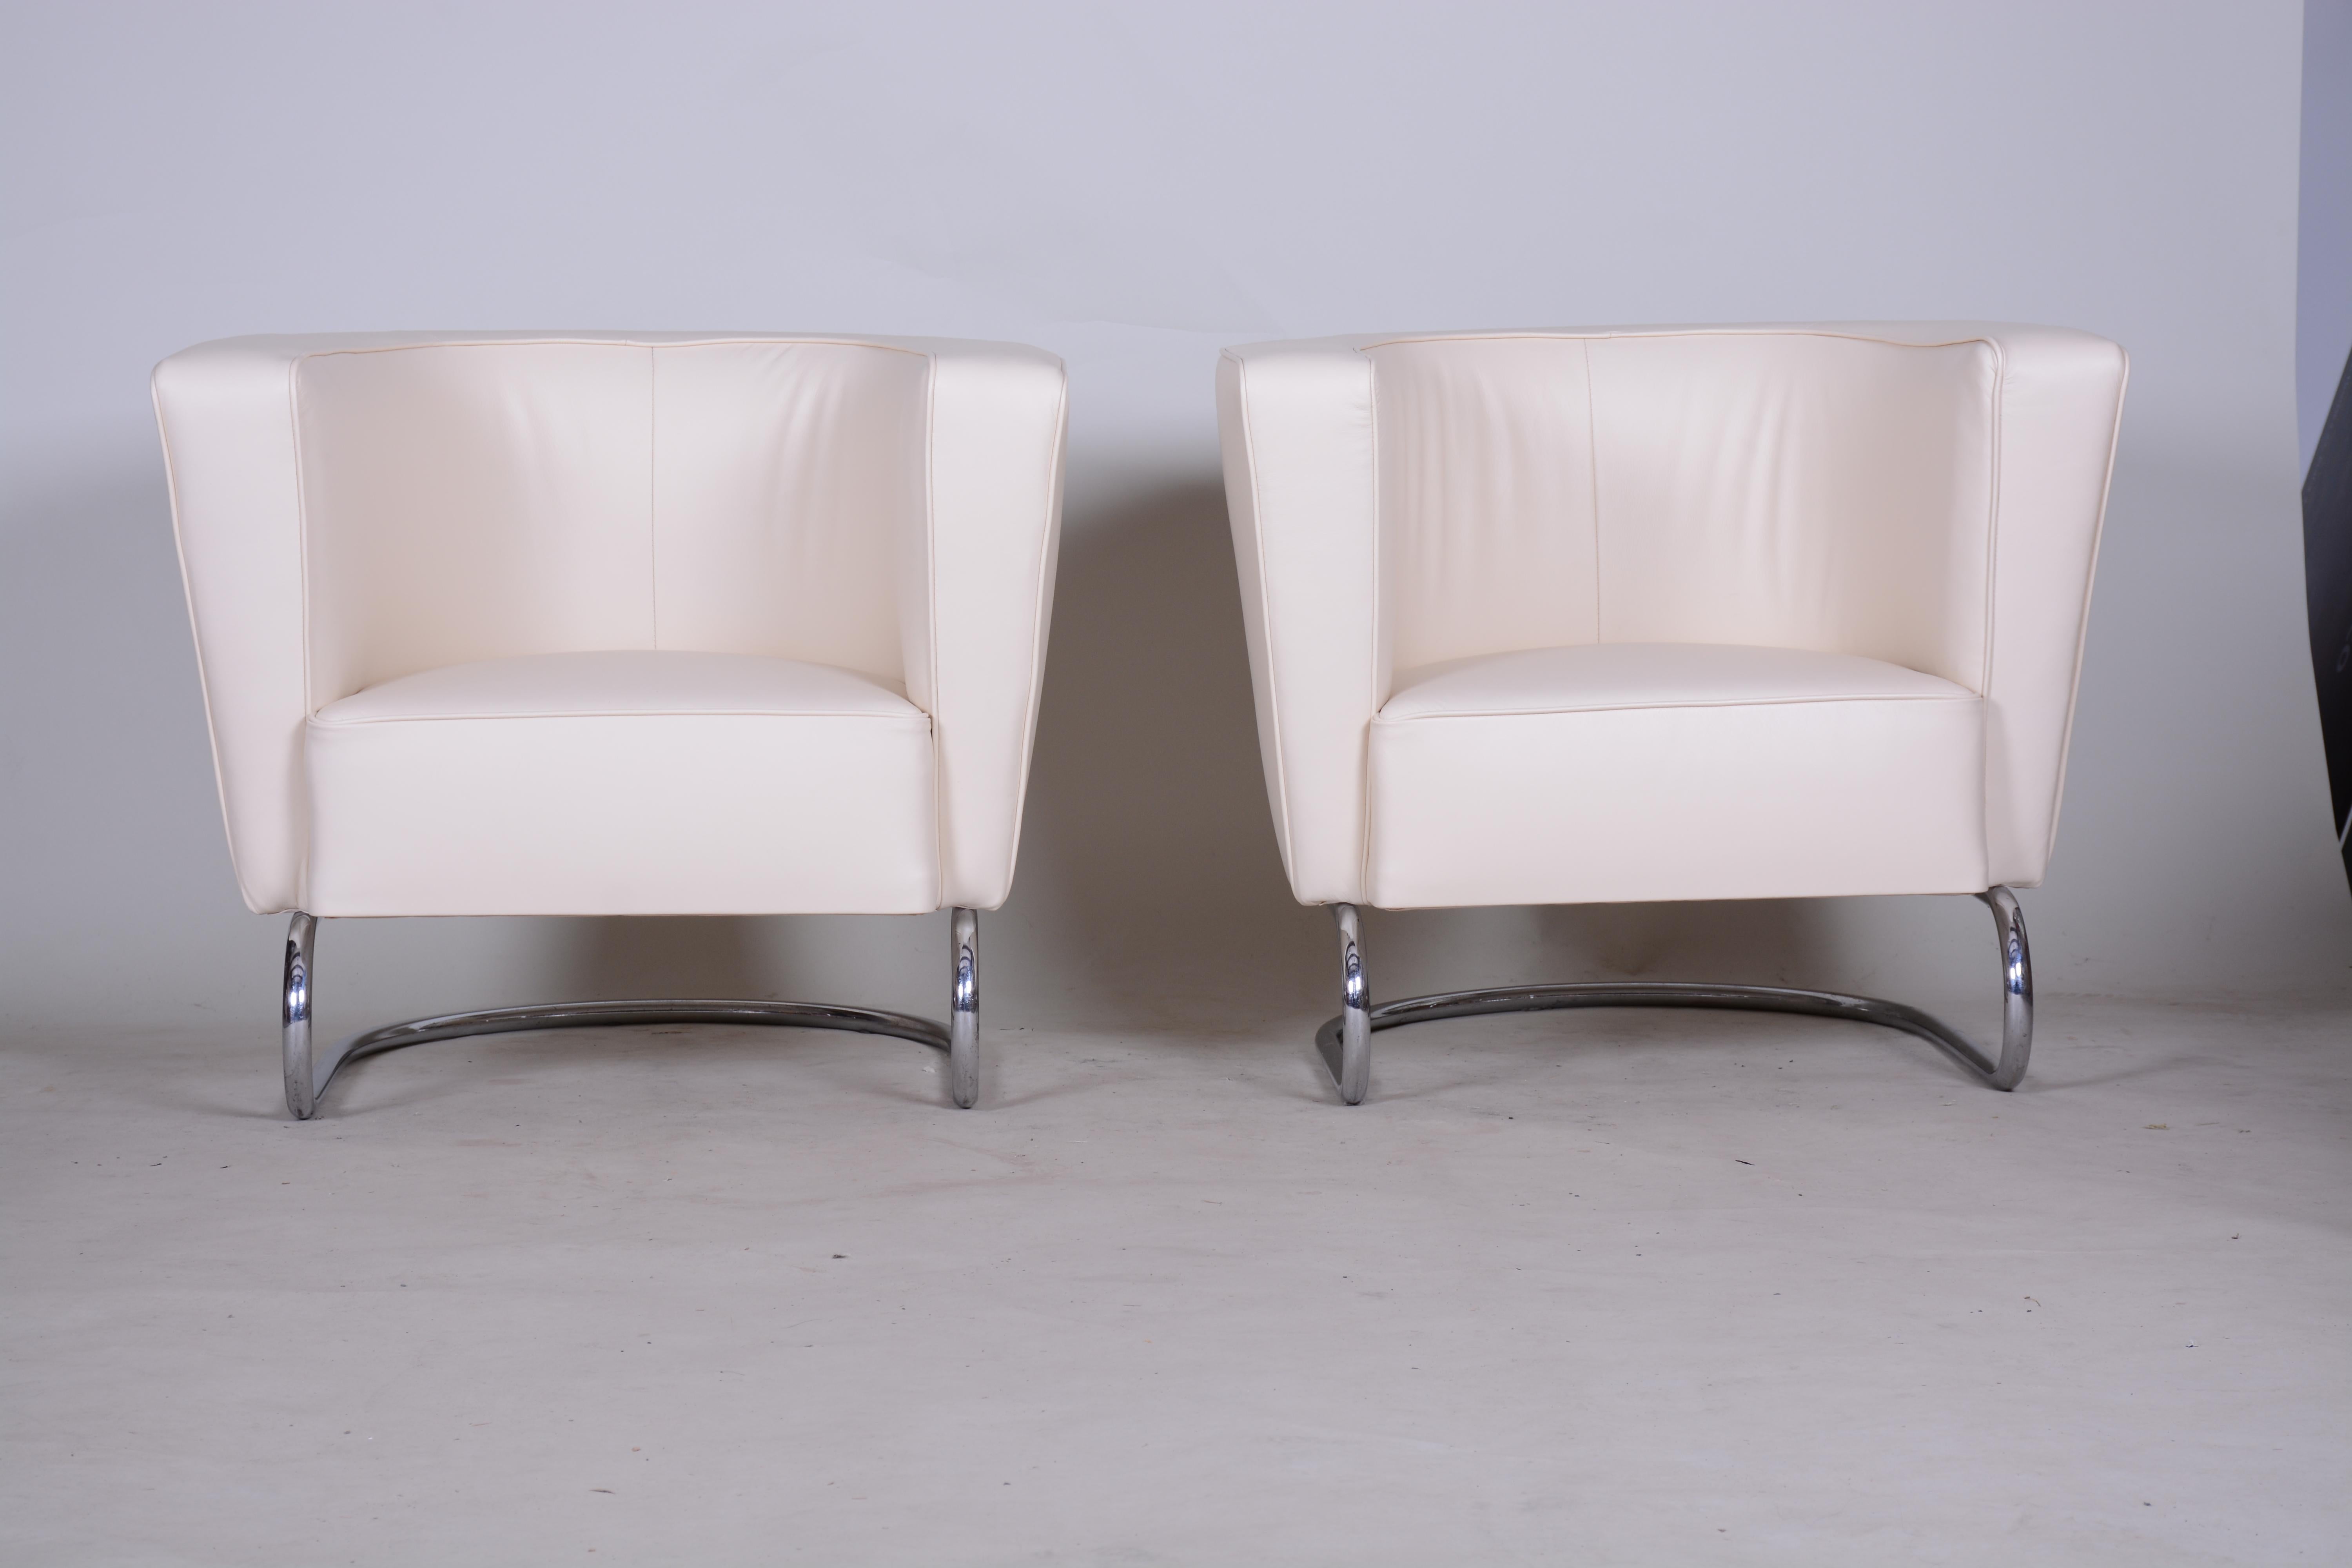 Pair of Art Deco armchairs.
United Arts & Crafts manufacture. Designed by Jindrich Halabala.
Material: Chrome-plated steel and High quality leather.  
 